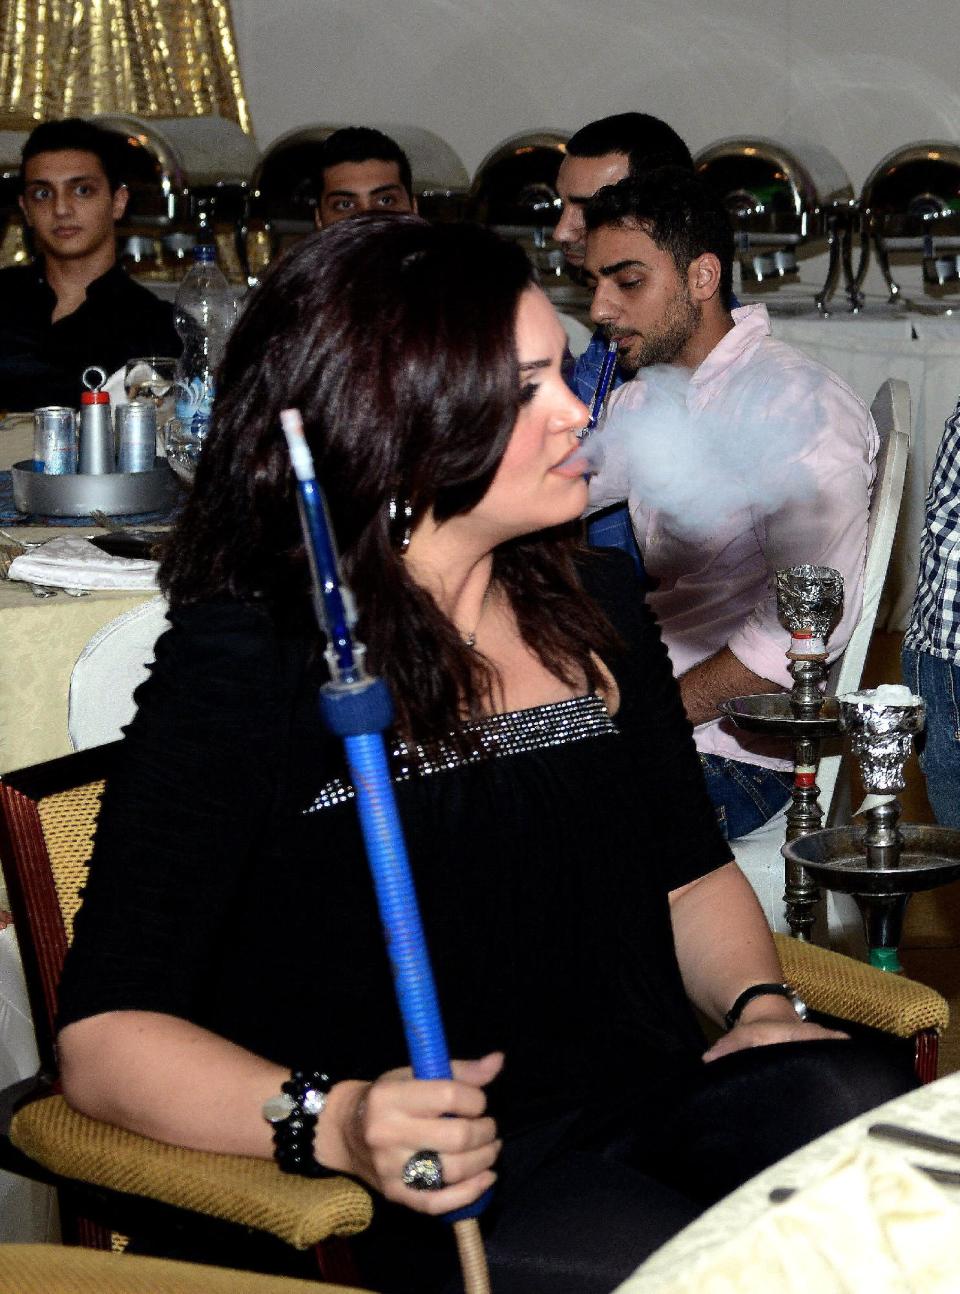 In this Monday, July 22, 2013 photo, an Arab woman smokes a water pipe during the holy Islamic month of Ramadan at a restaurant in Kuwait. One of the most traditional pleasures of the Middle East, leisurely puffing on a water pipe filled with aromatic tobacco _ has become ensnared in another of the region's familiar backdrops: Islamic conservatives decrying what they see as liberal decadence. (AP Photo/Gustavo Ferrari)